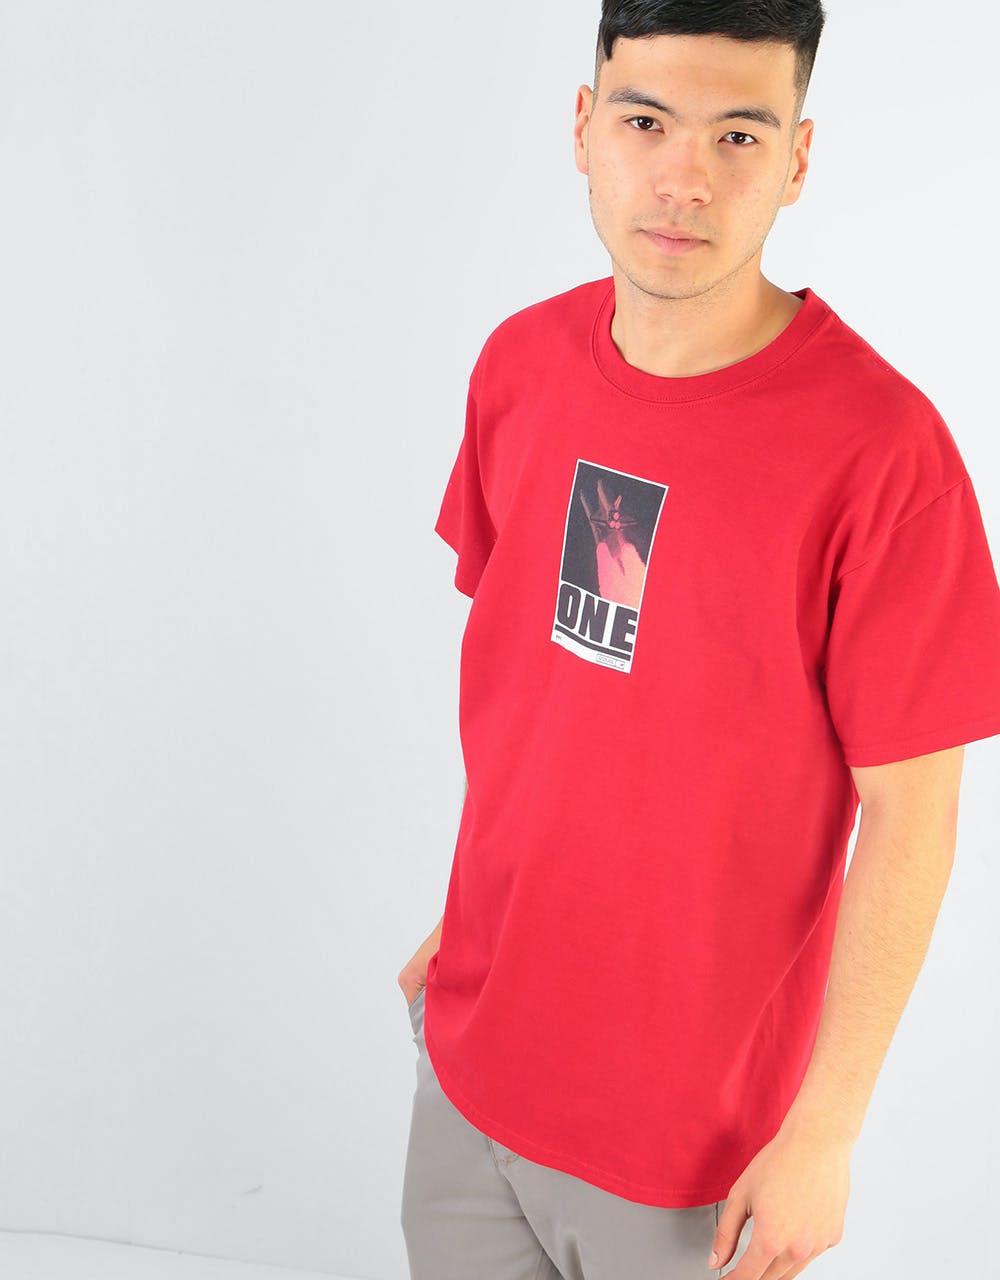 Route One Lift Off T-Shirt - Cherry Red